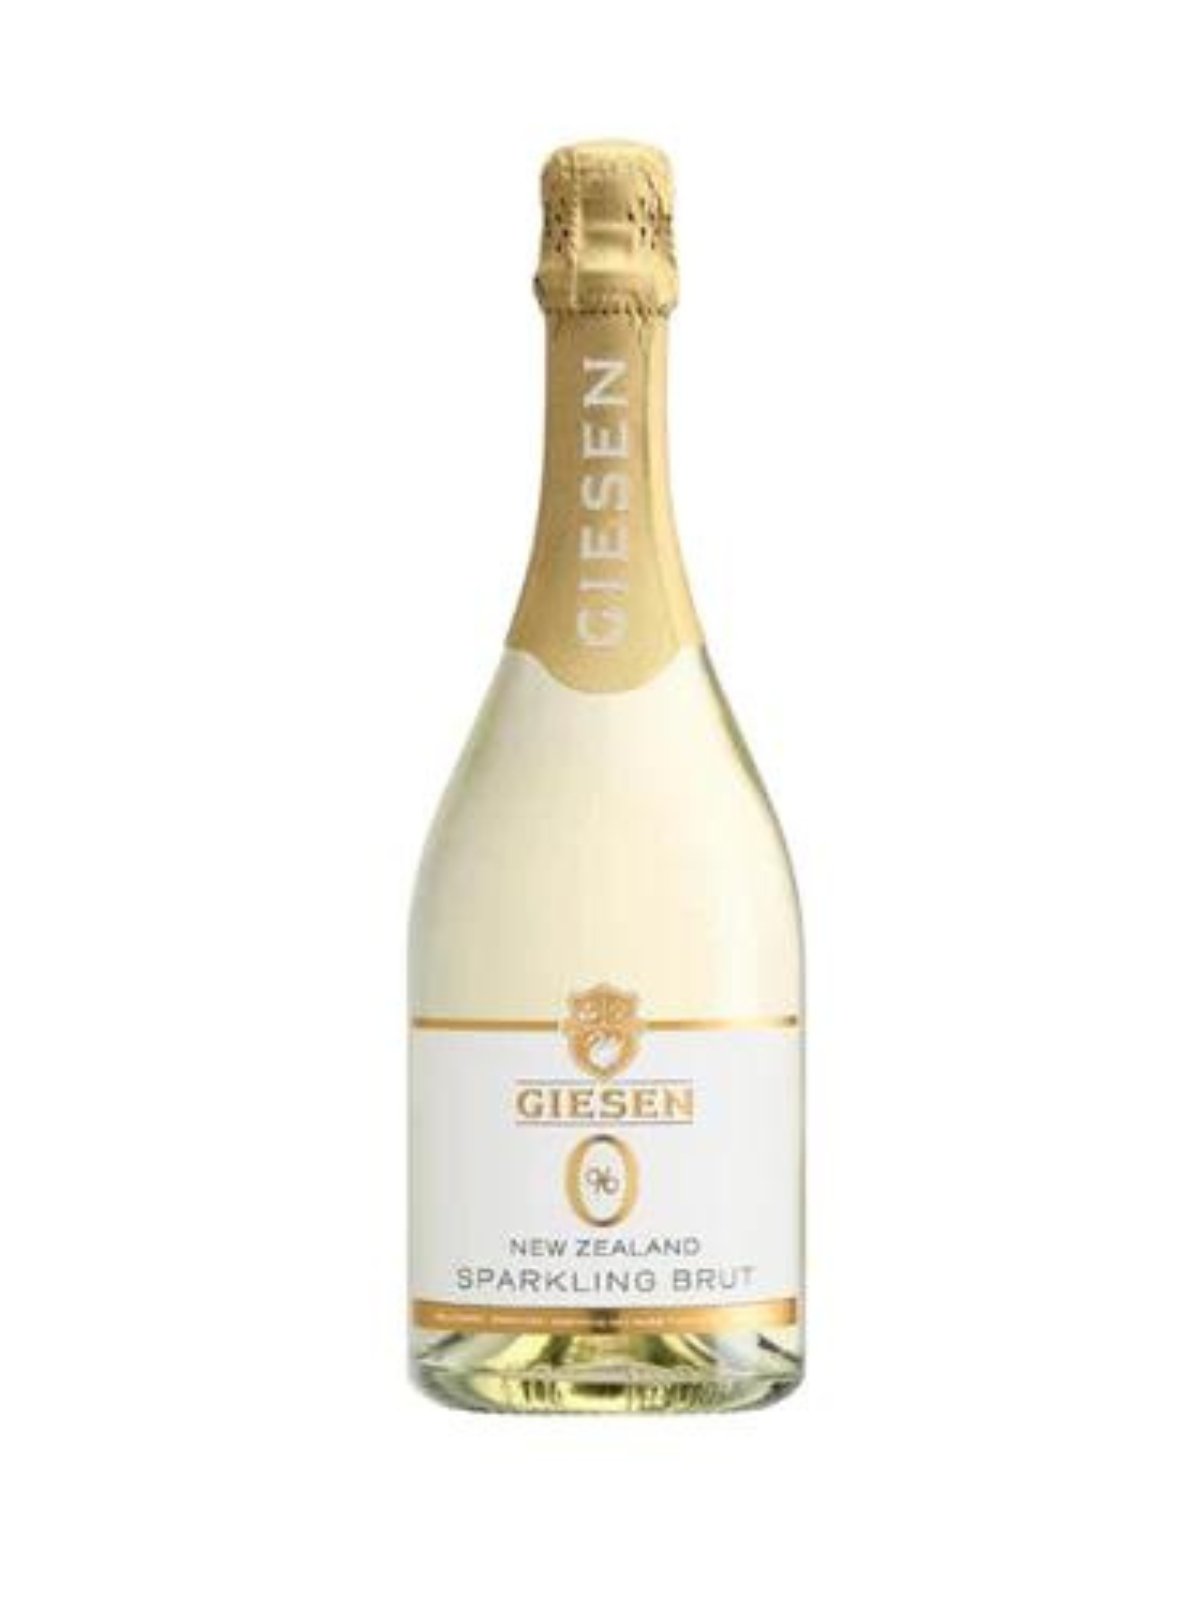 product photo of giesen alcohol removed sparkling wine with a white label and gold writing.